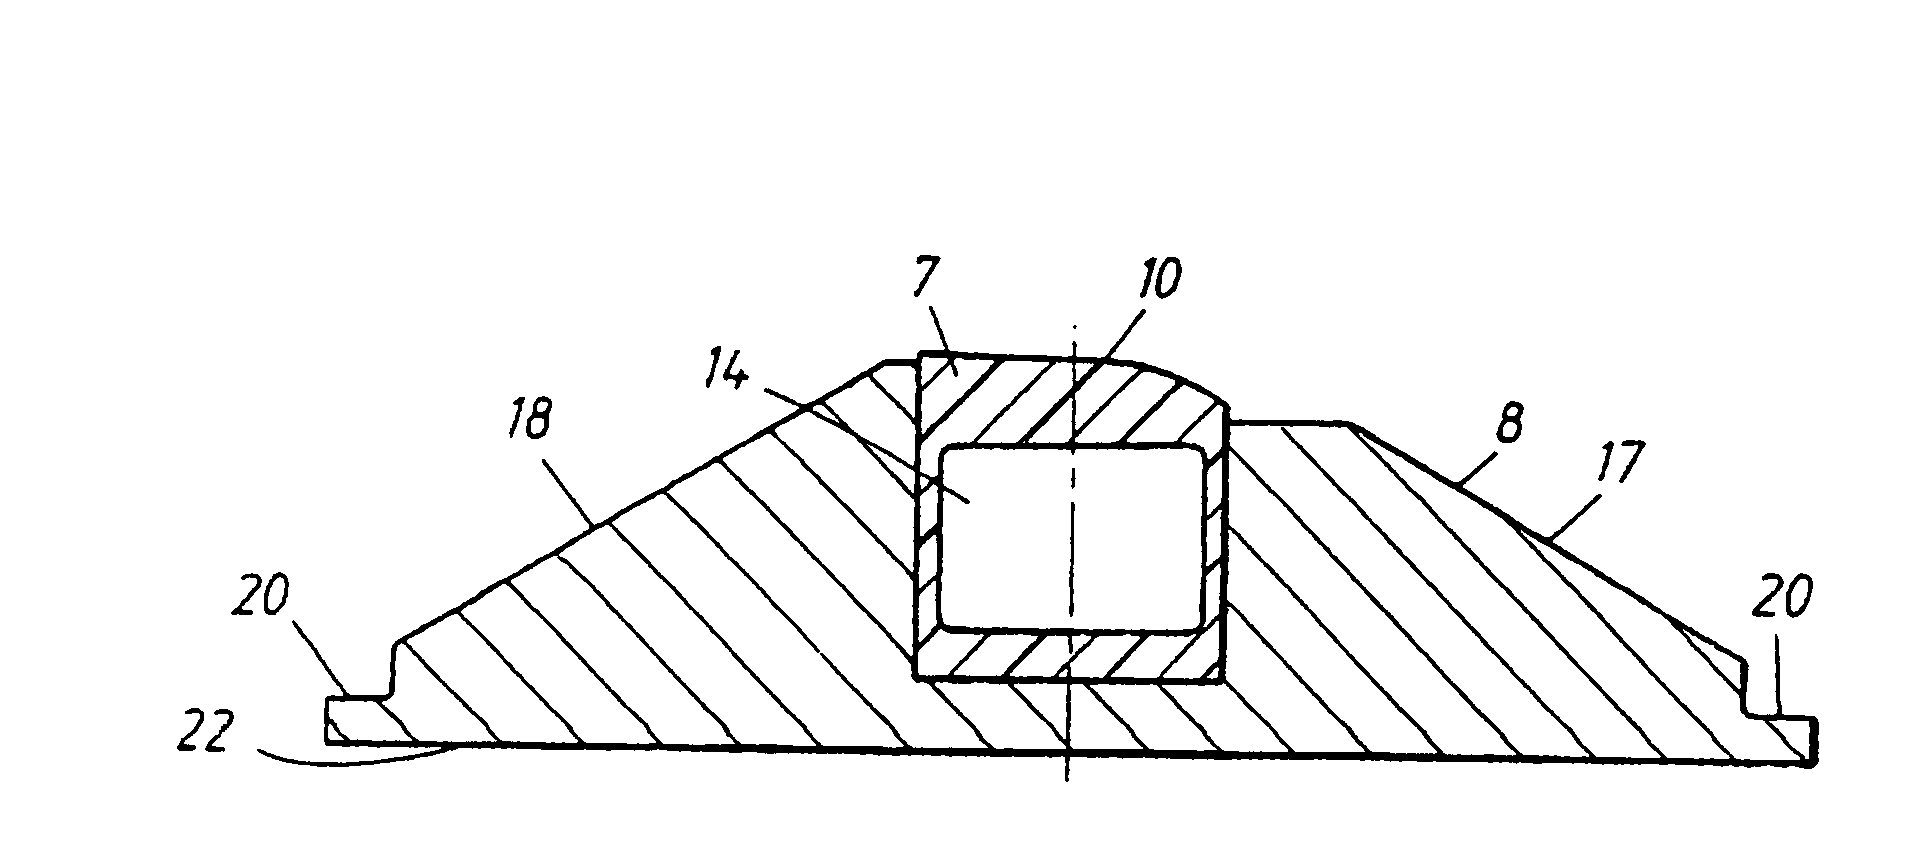 Support body, holding device therefor, apparatus with said body for treatment of a web, and methods of forming an extended nip in the apparatus and controlling load in the nip